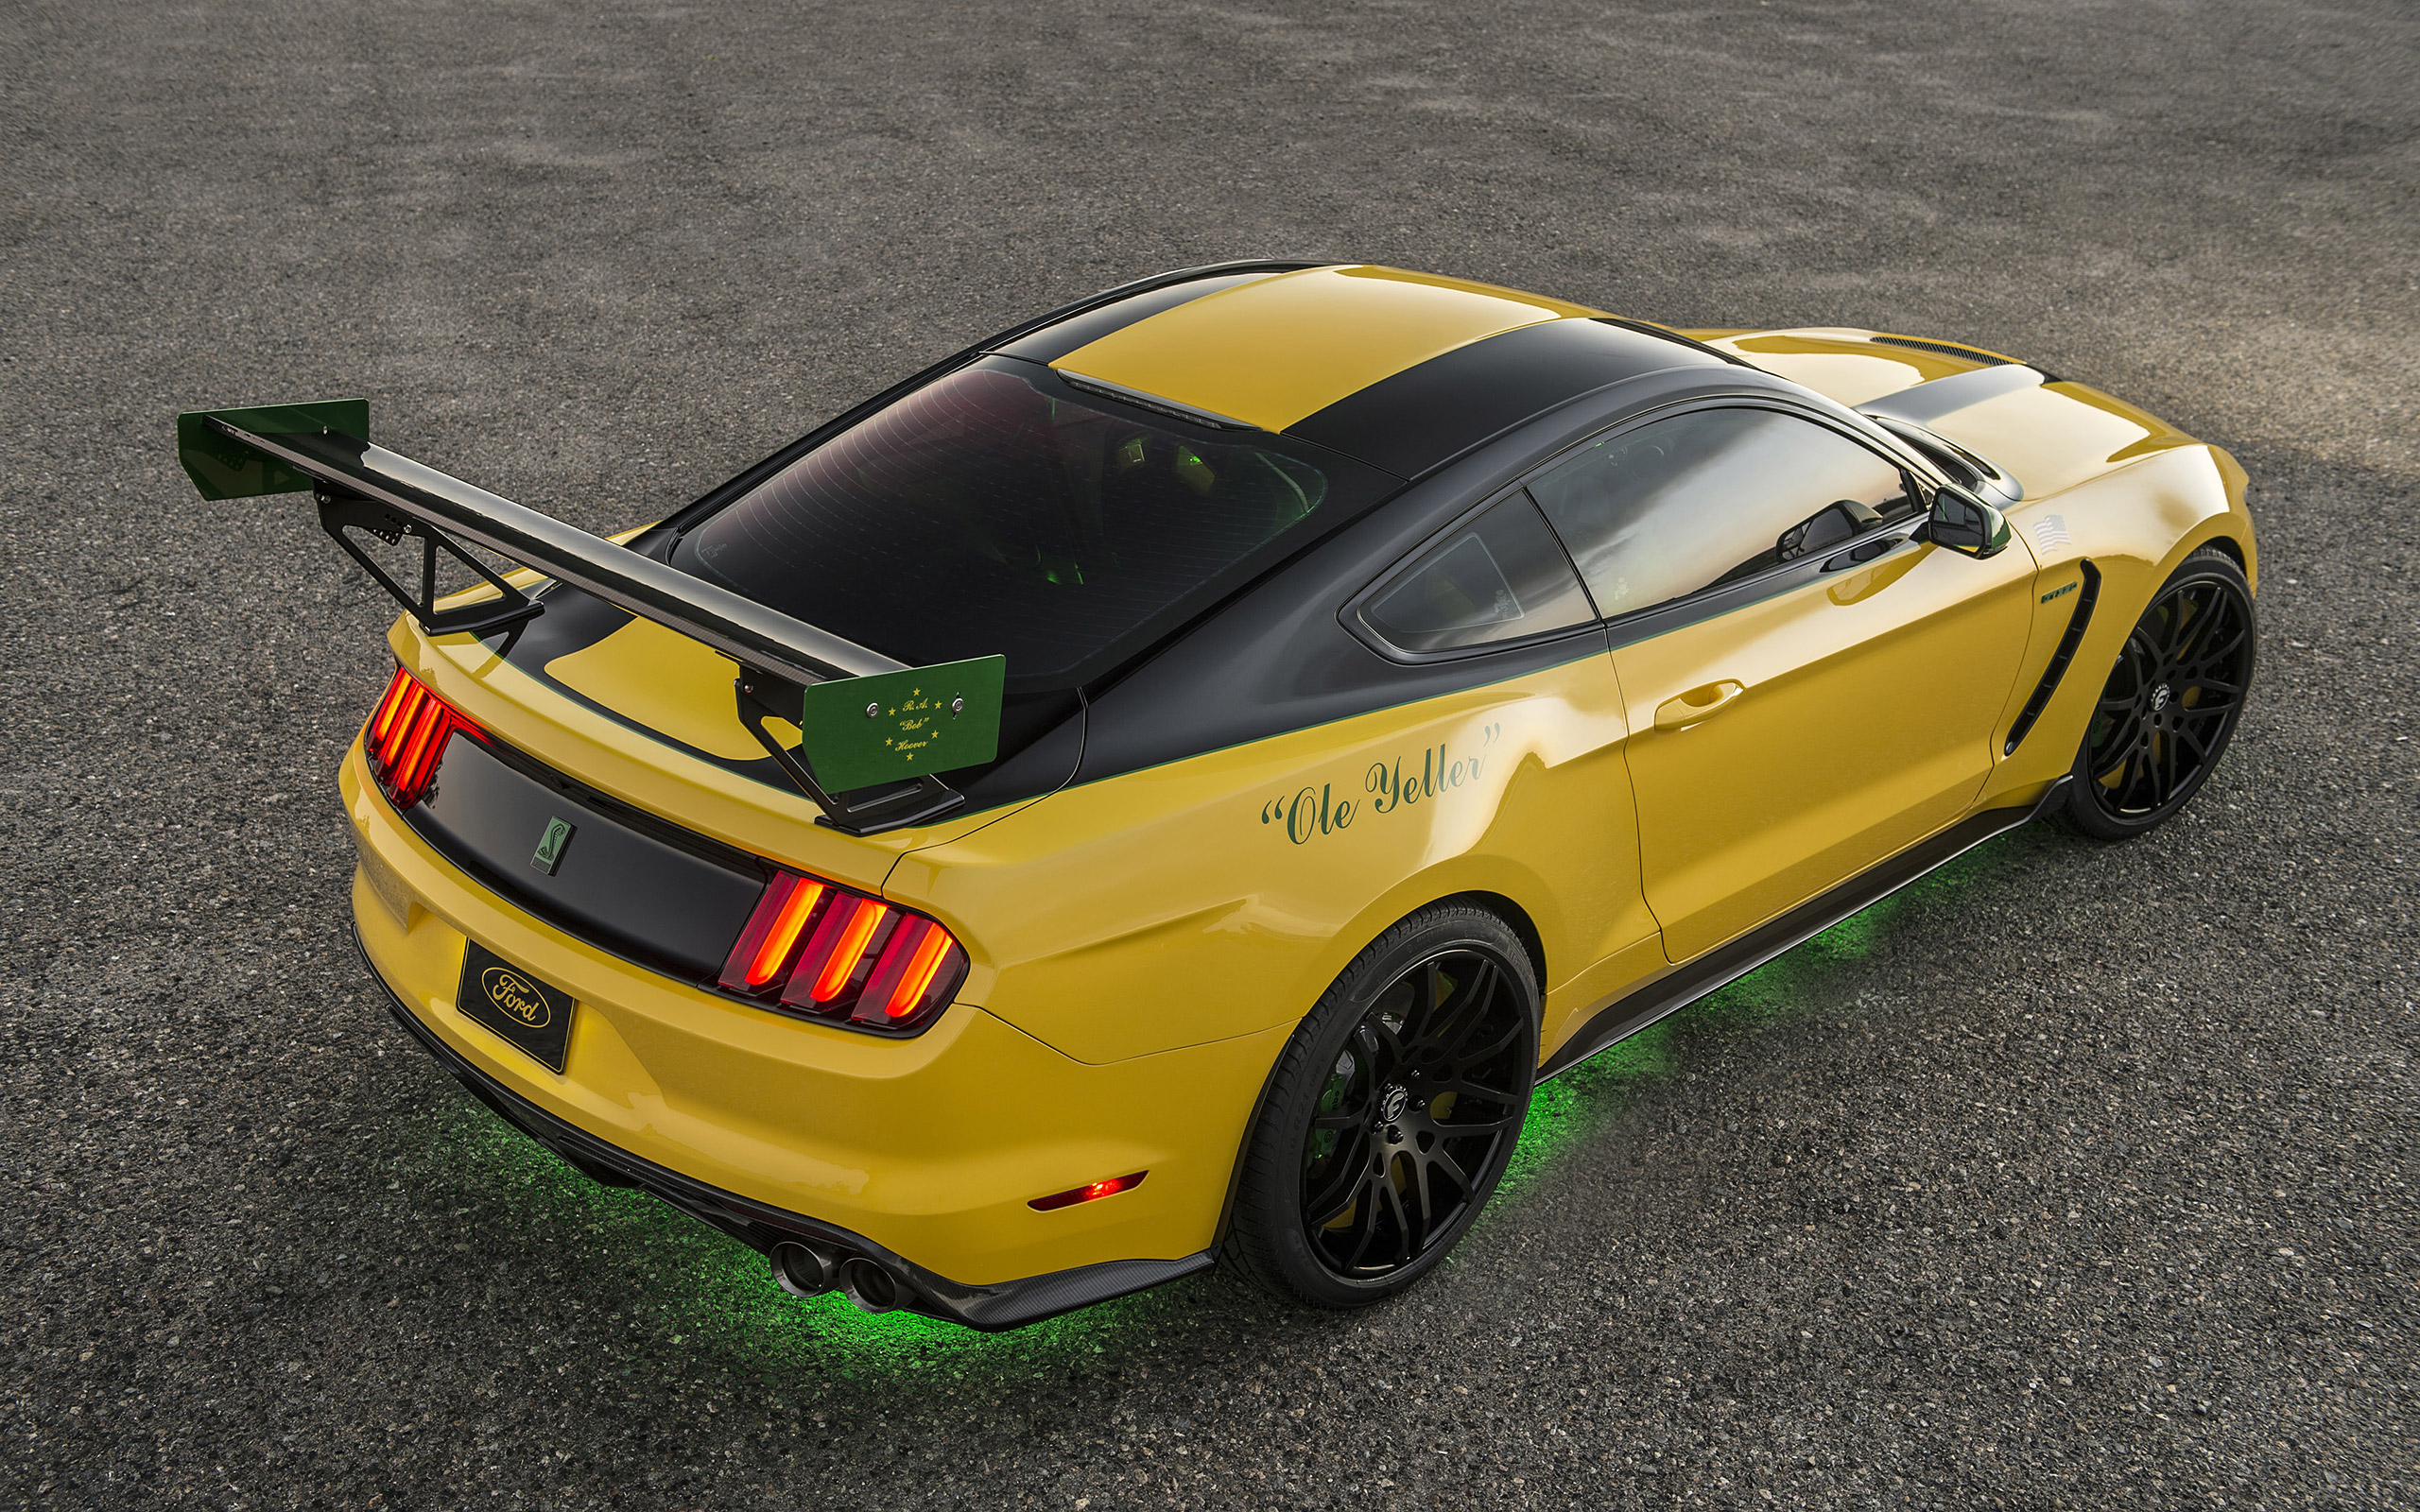  2016 Ford Shelby Mustang GT350 \'Ole Yeller\' Wallpaper.